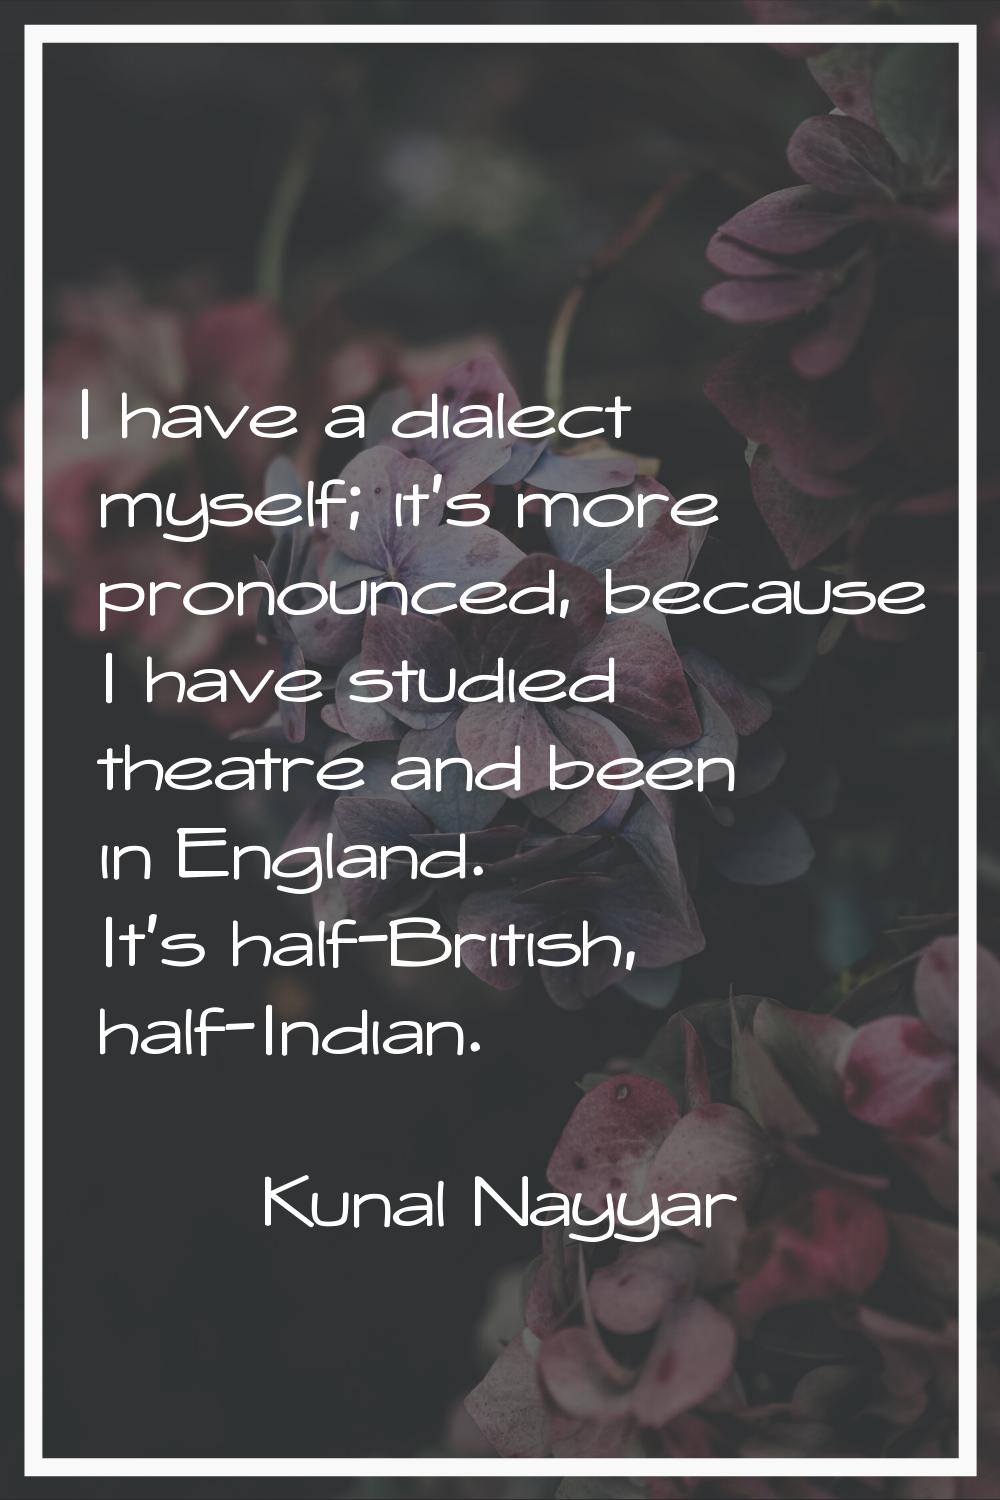 I have a dialect myself; it's more pronounced, because I have studied theatre and been in England. 